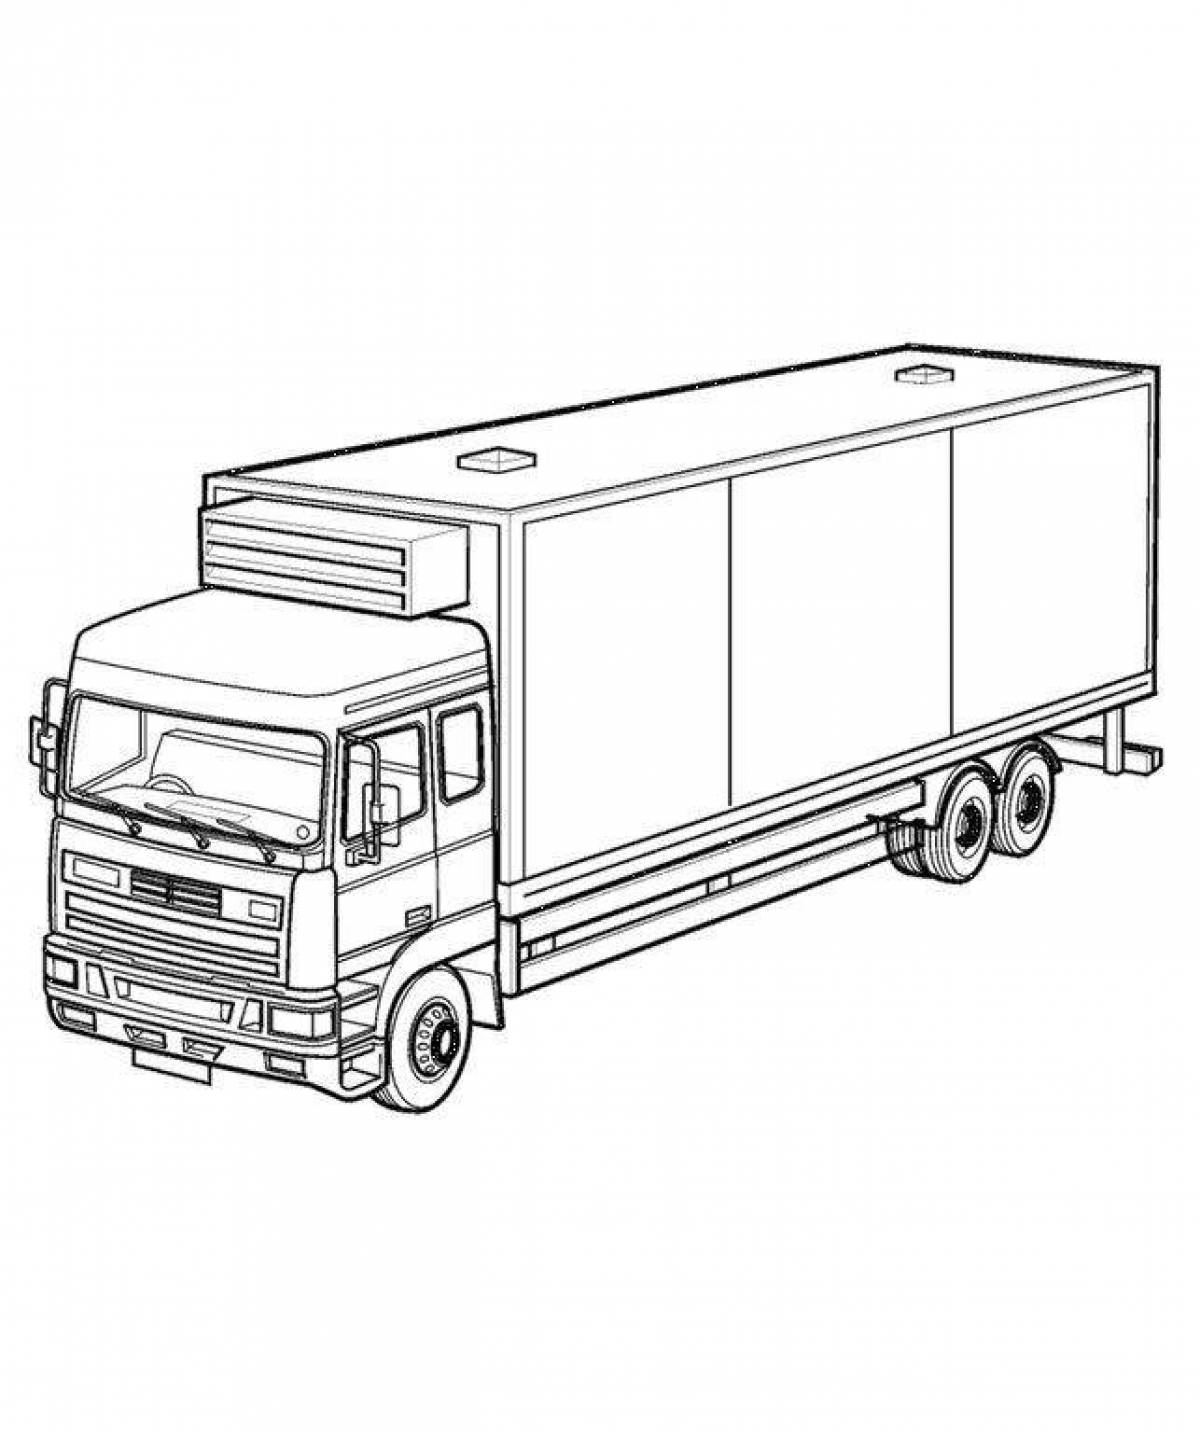 Coloring page luxury male truck